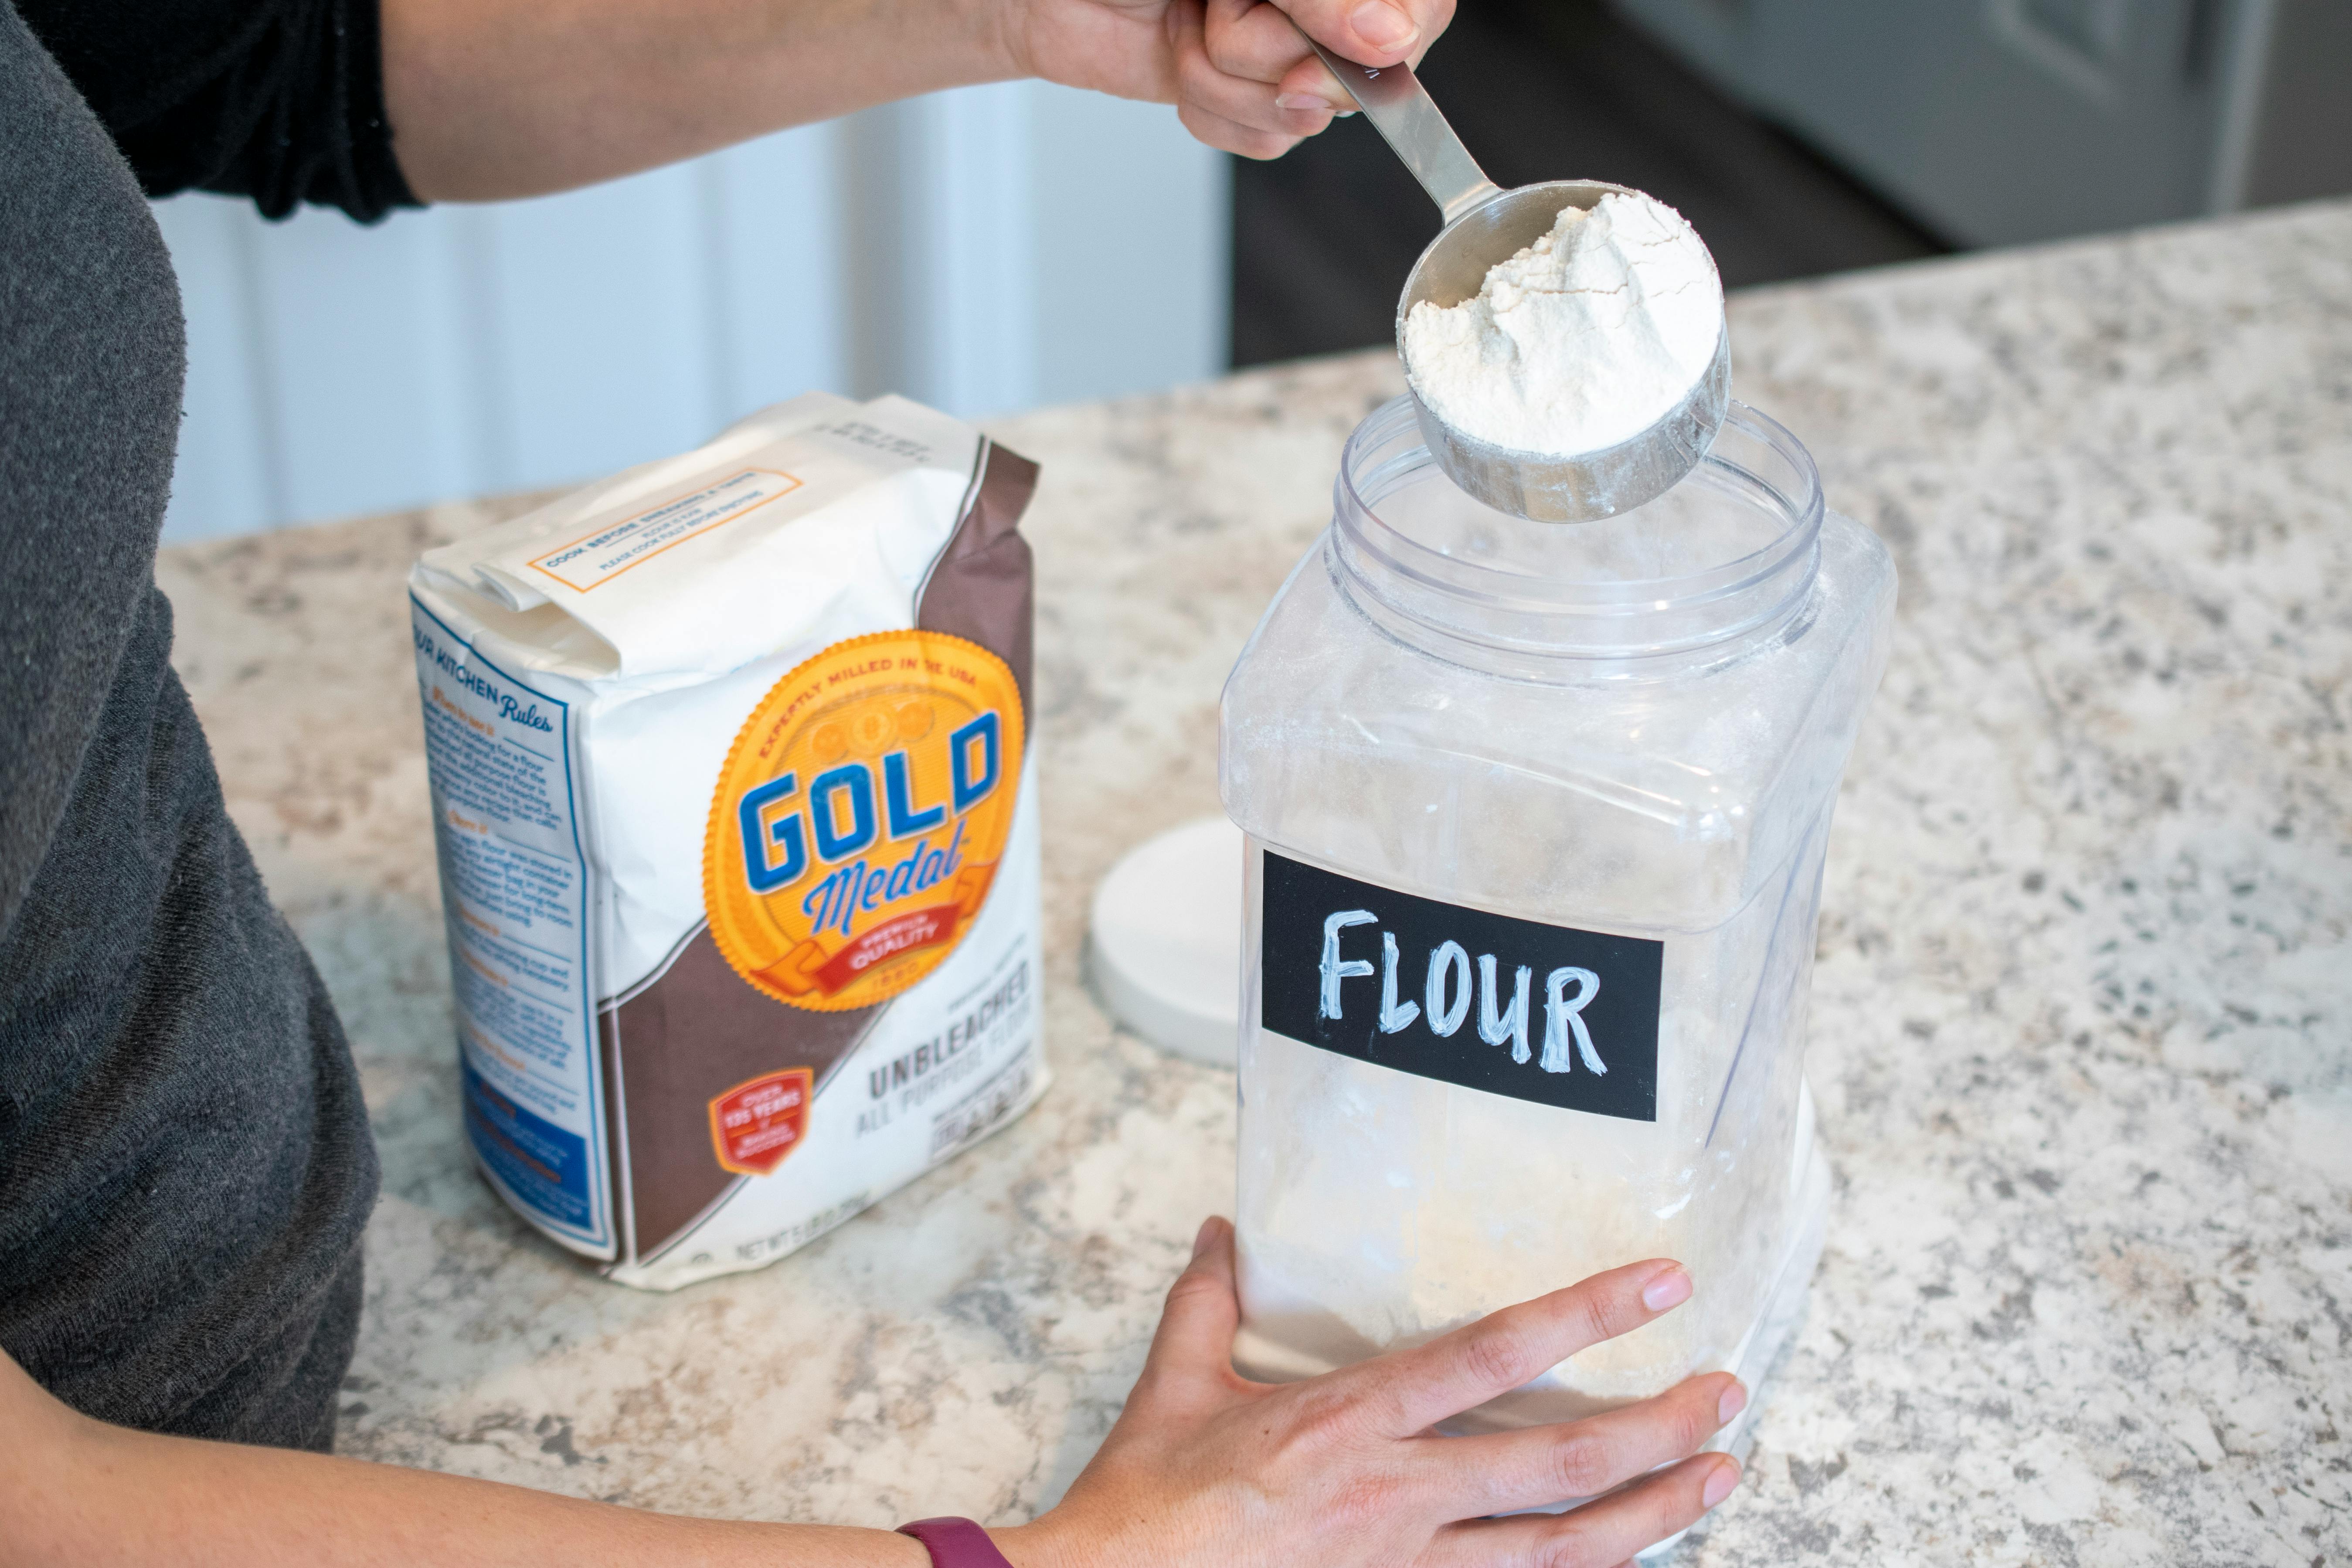 A person scooping flour out of a clear plastic container